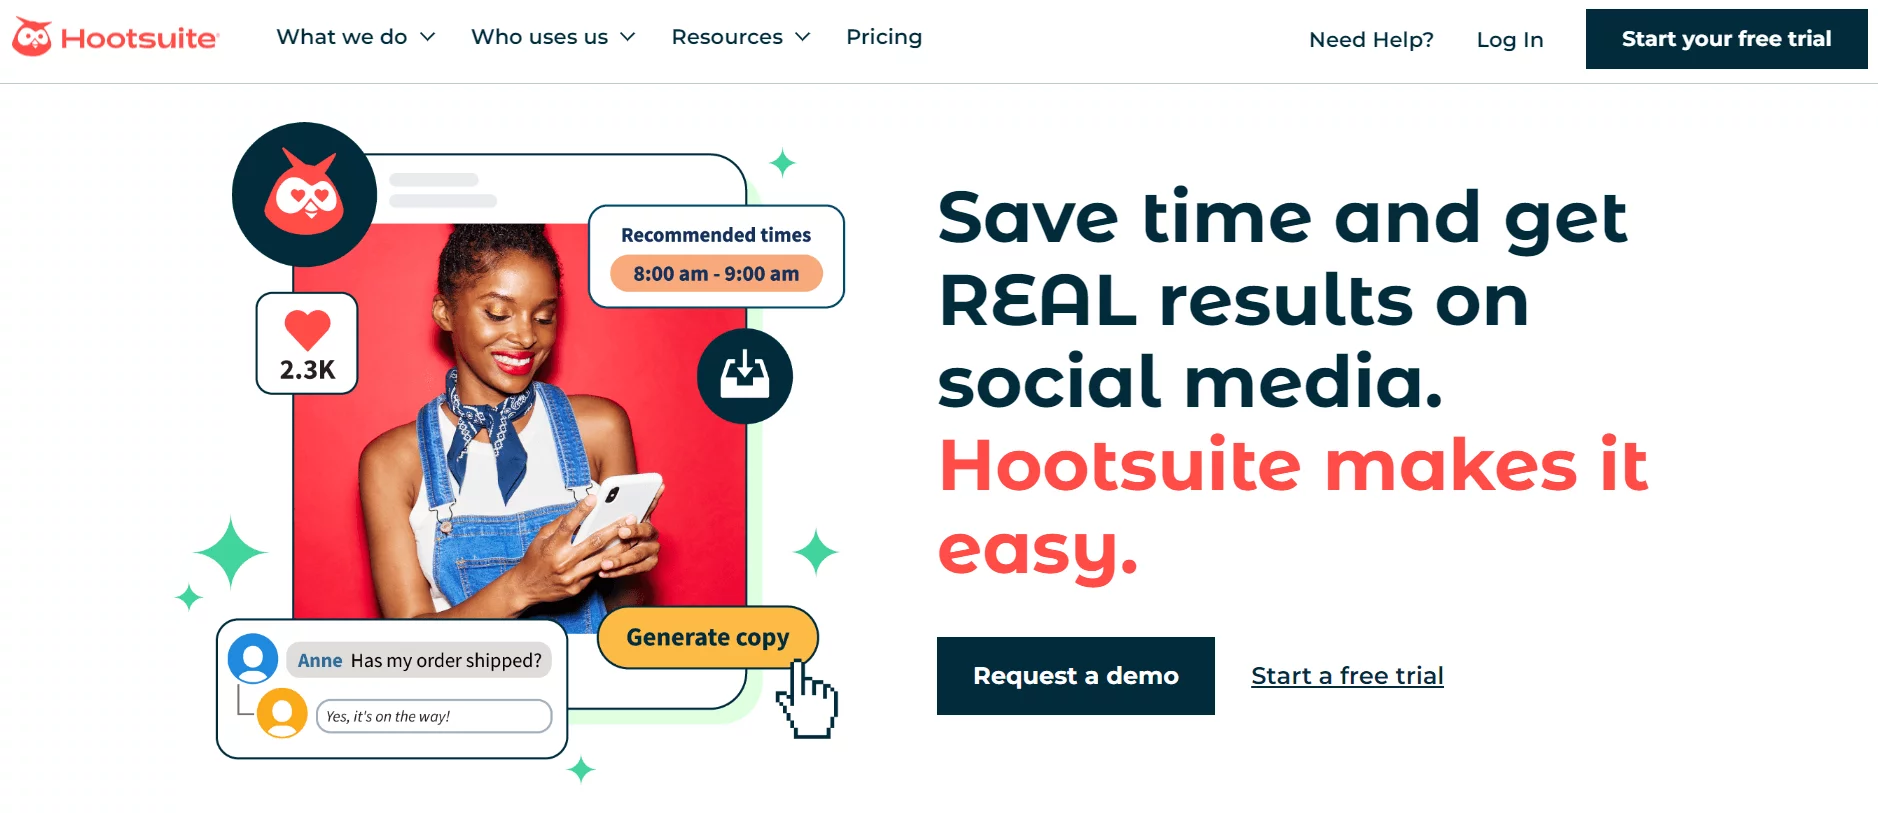 Hotsuite homepage showing the motto "Save time and get results on social media, Hootsuite makes it easy", with a schematic image showing multiple social media management activites